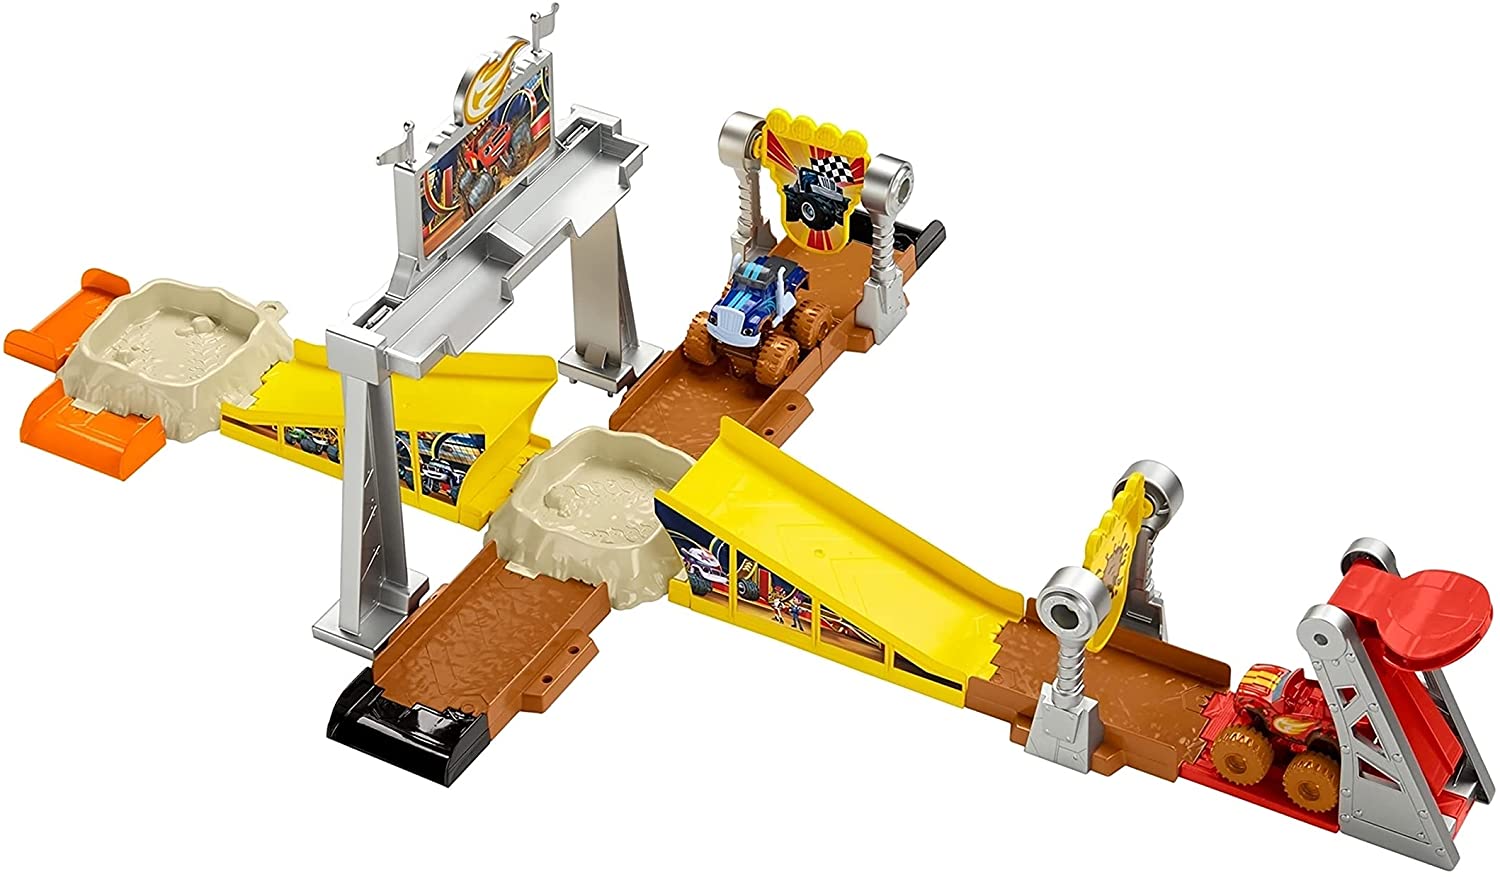 Fisher-Price Blaze & the Monster Machines Mud Pit Race Track Playset $11.25 + Free Shipping w/ Amazon Prime or Orders $25+